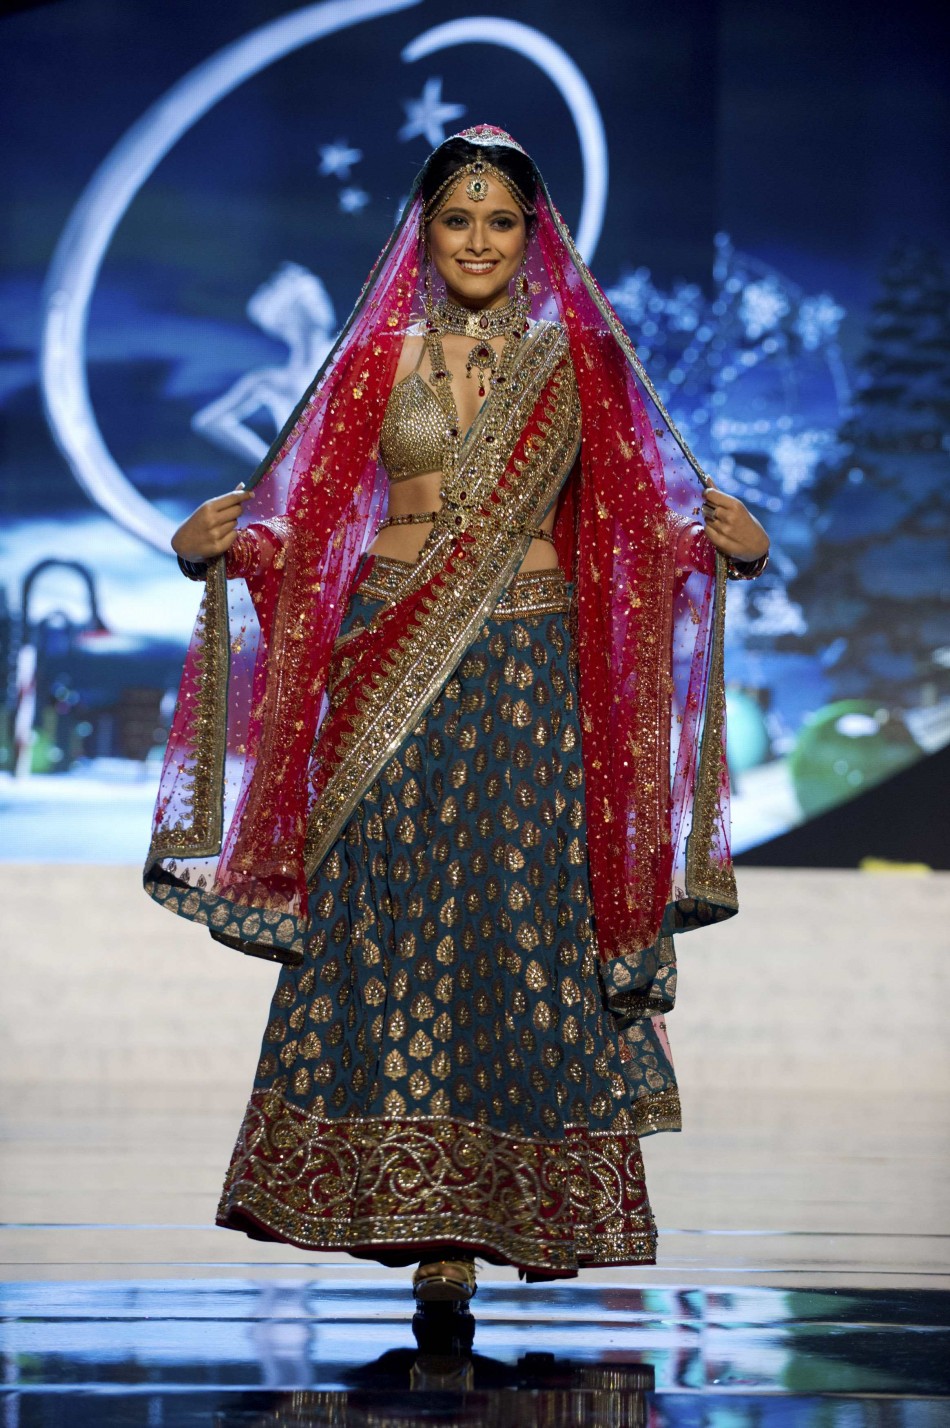 Miss India Ruhi Singh on stage at the 2012 Miss Universe National Costume Show at PH Live in Las Vegas